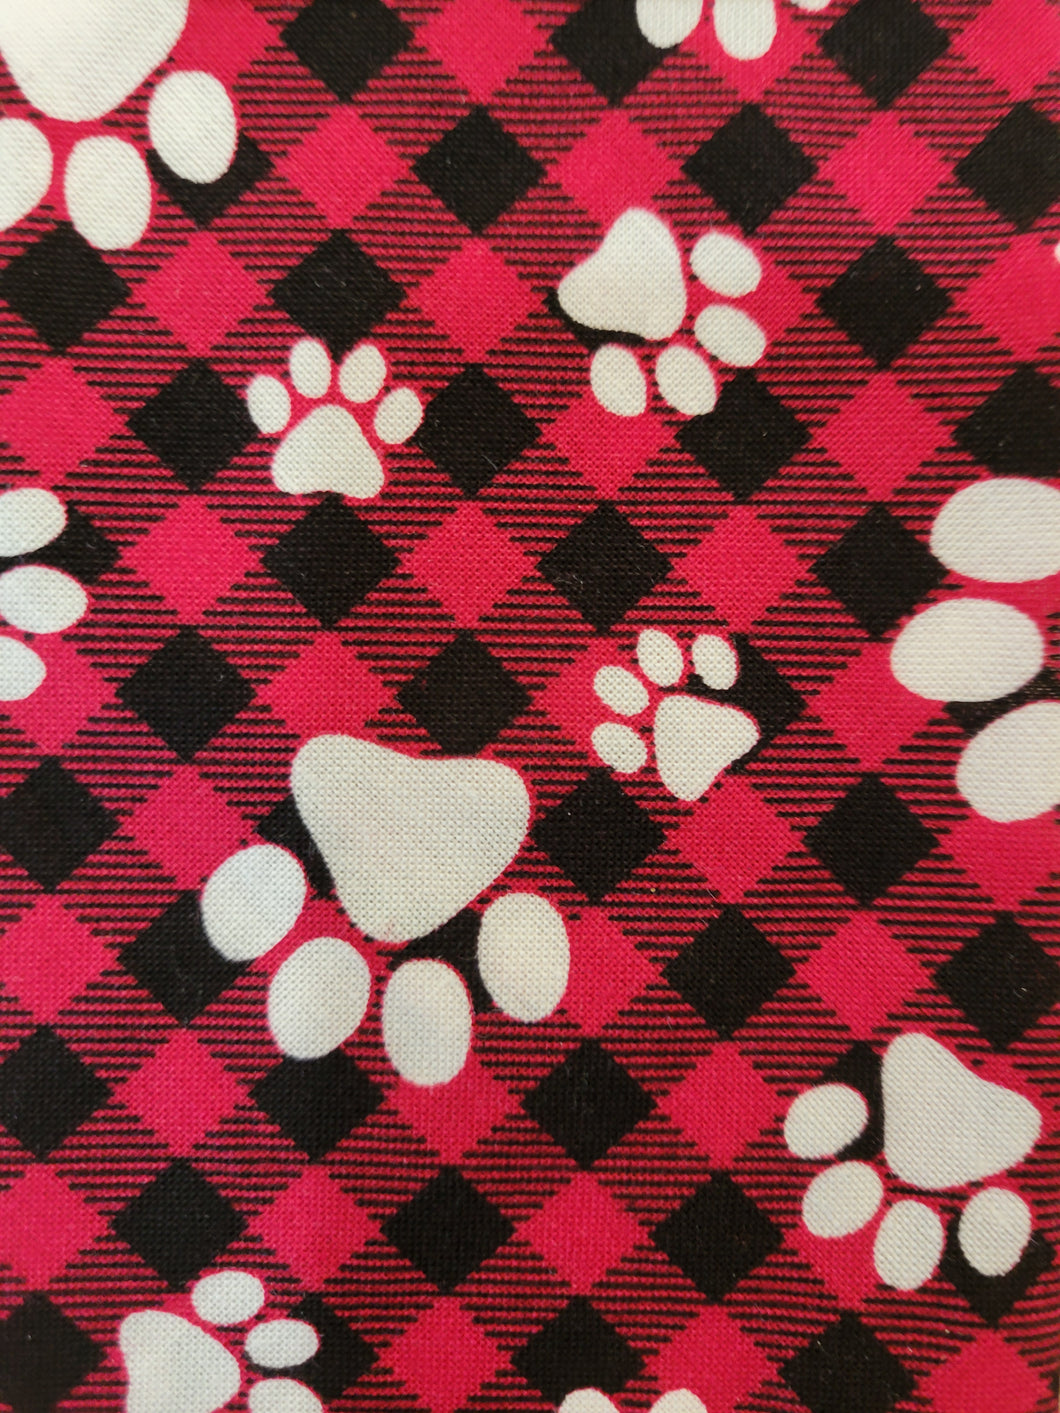 Red and Black Check with Paws Bandana (MEDIUM)